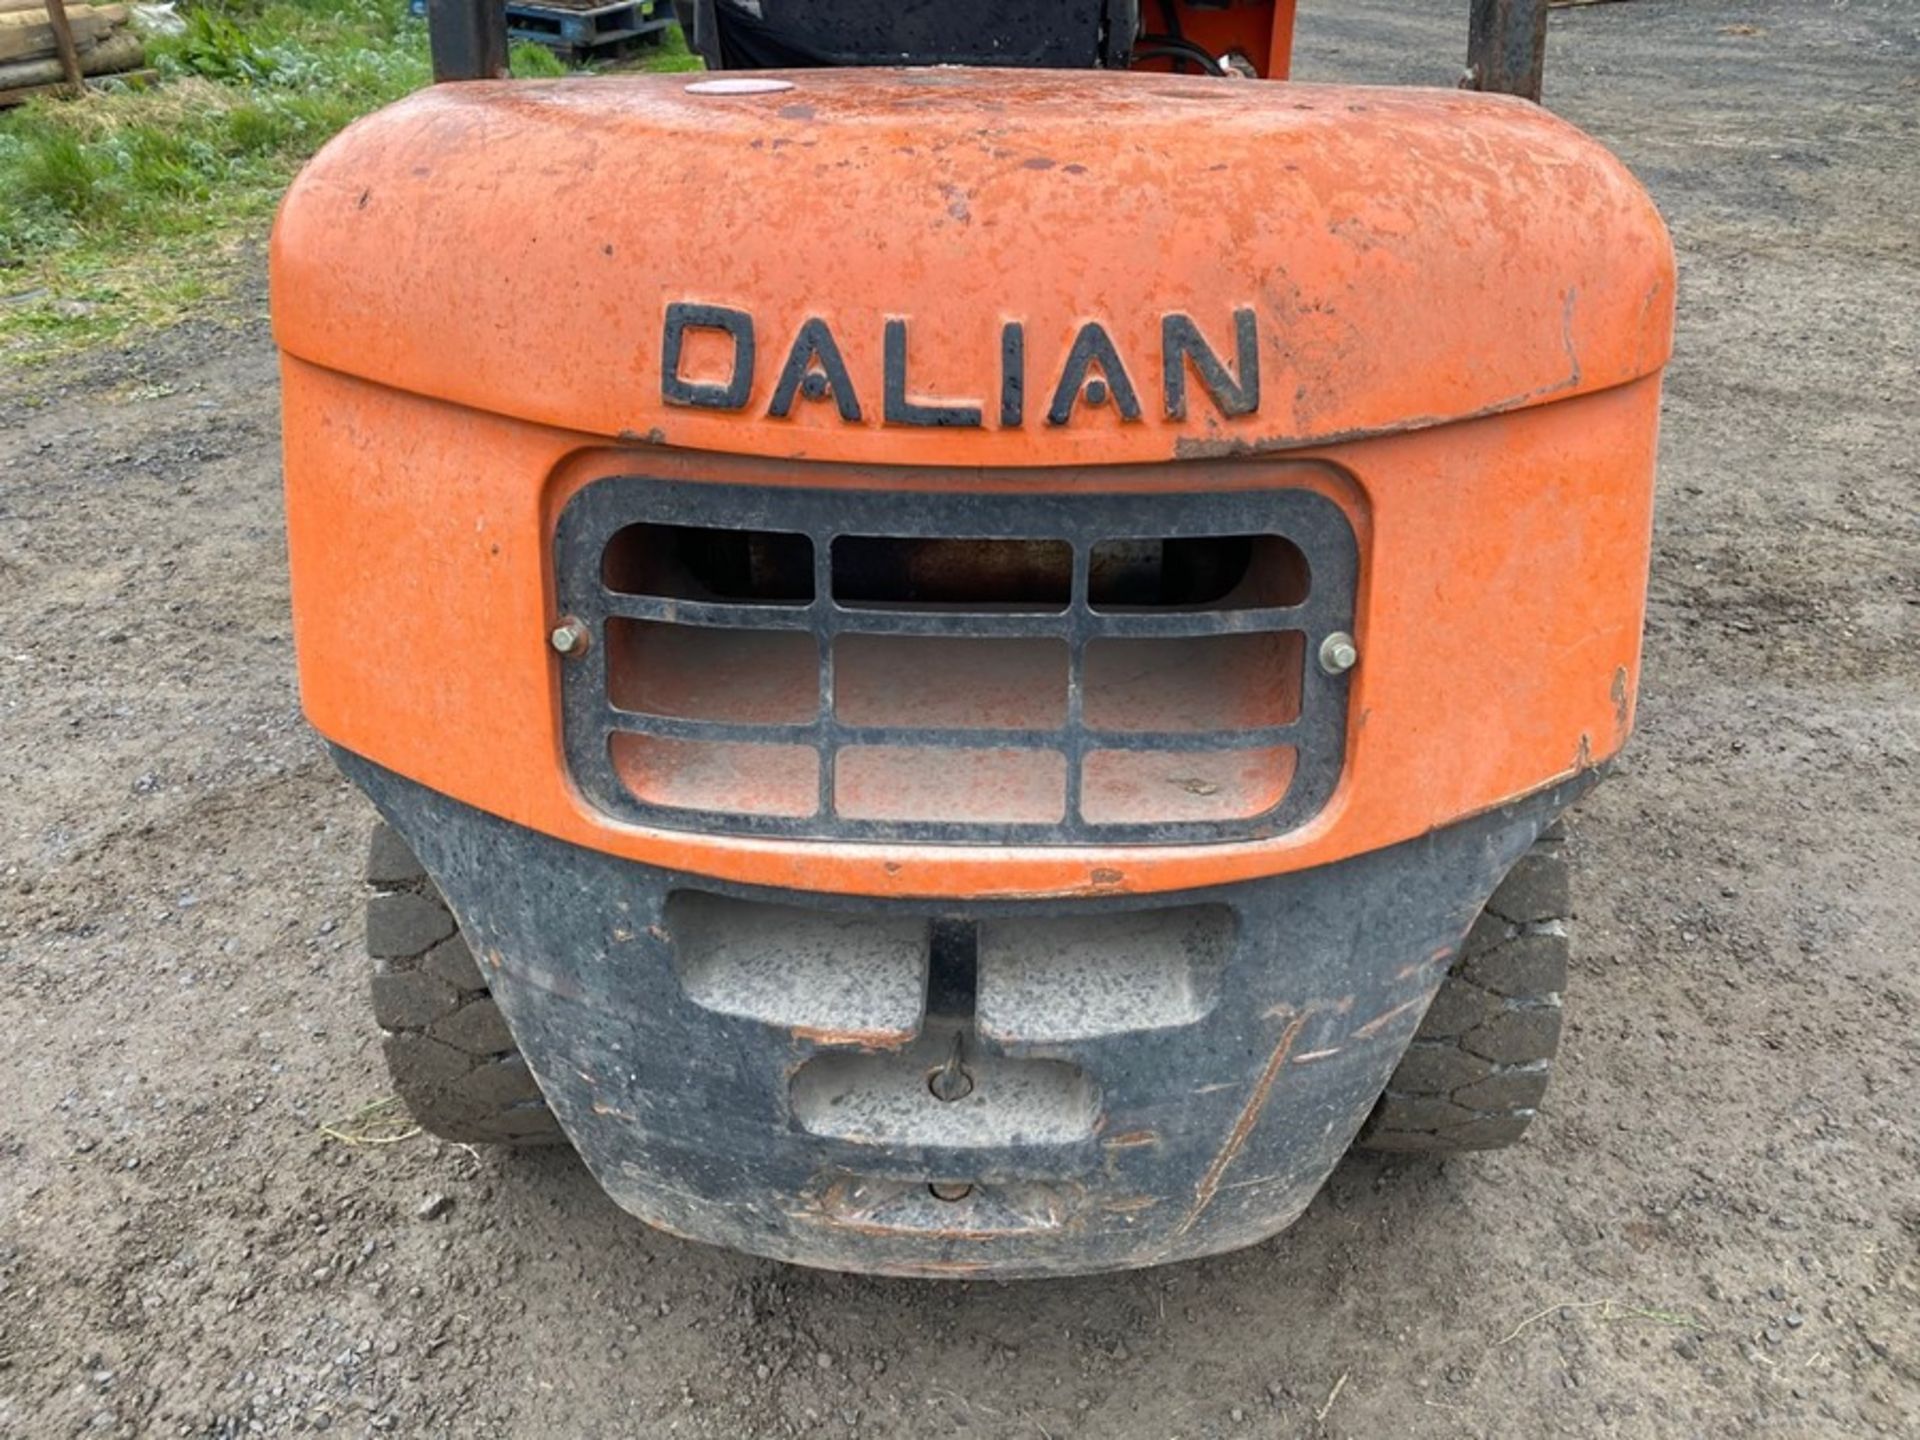 DALIAN 3TONNE FORKLIFT 904 HOURS C/W NEW SOLID BACK WHEELS (RUNNING WELL) - Image 7 of 9